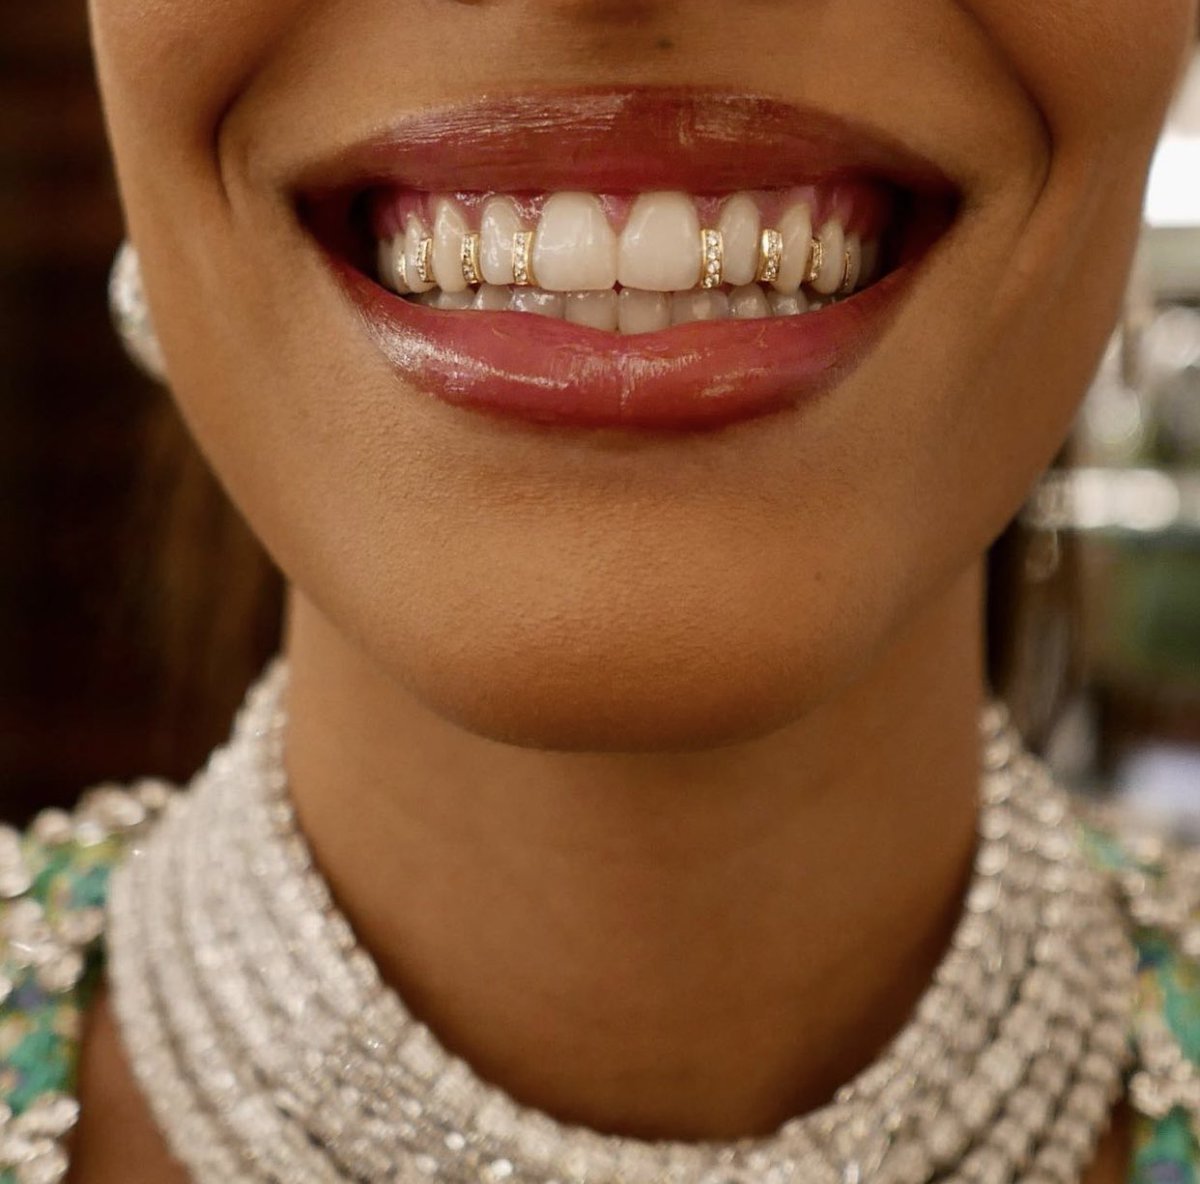 Grillz by Dolly Cohen